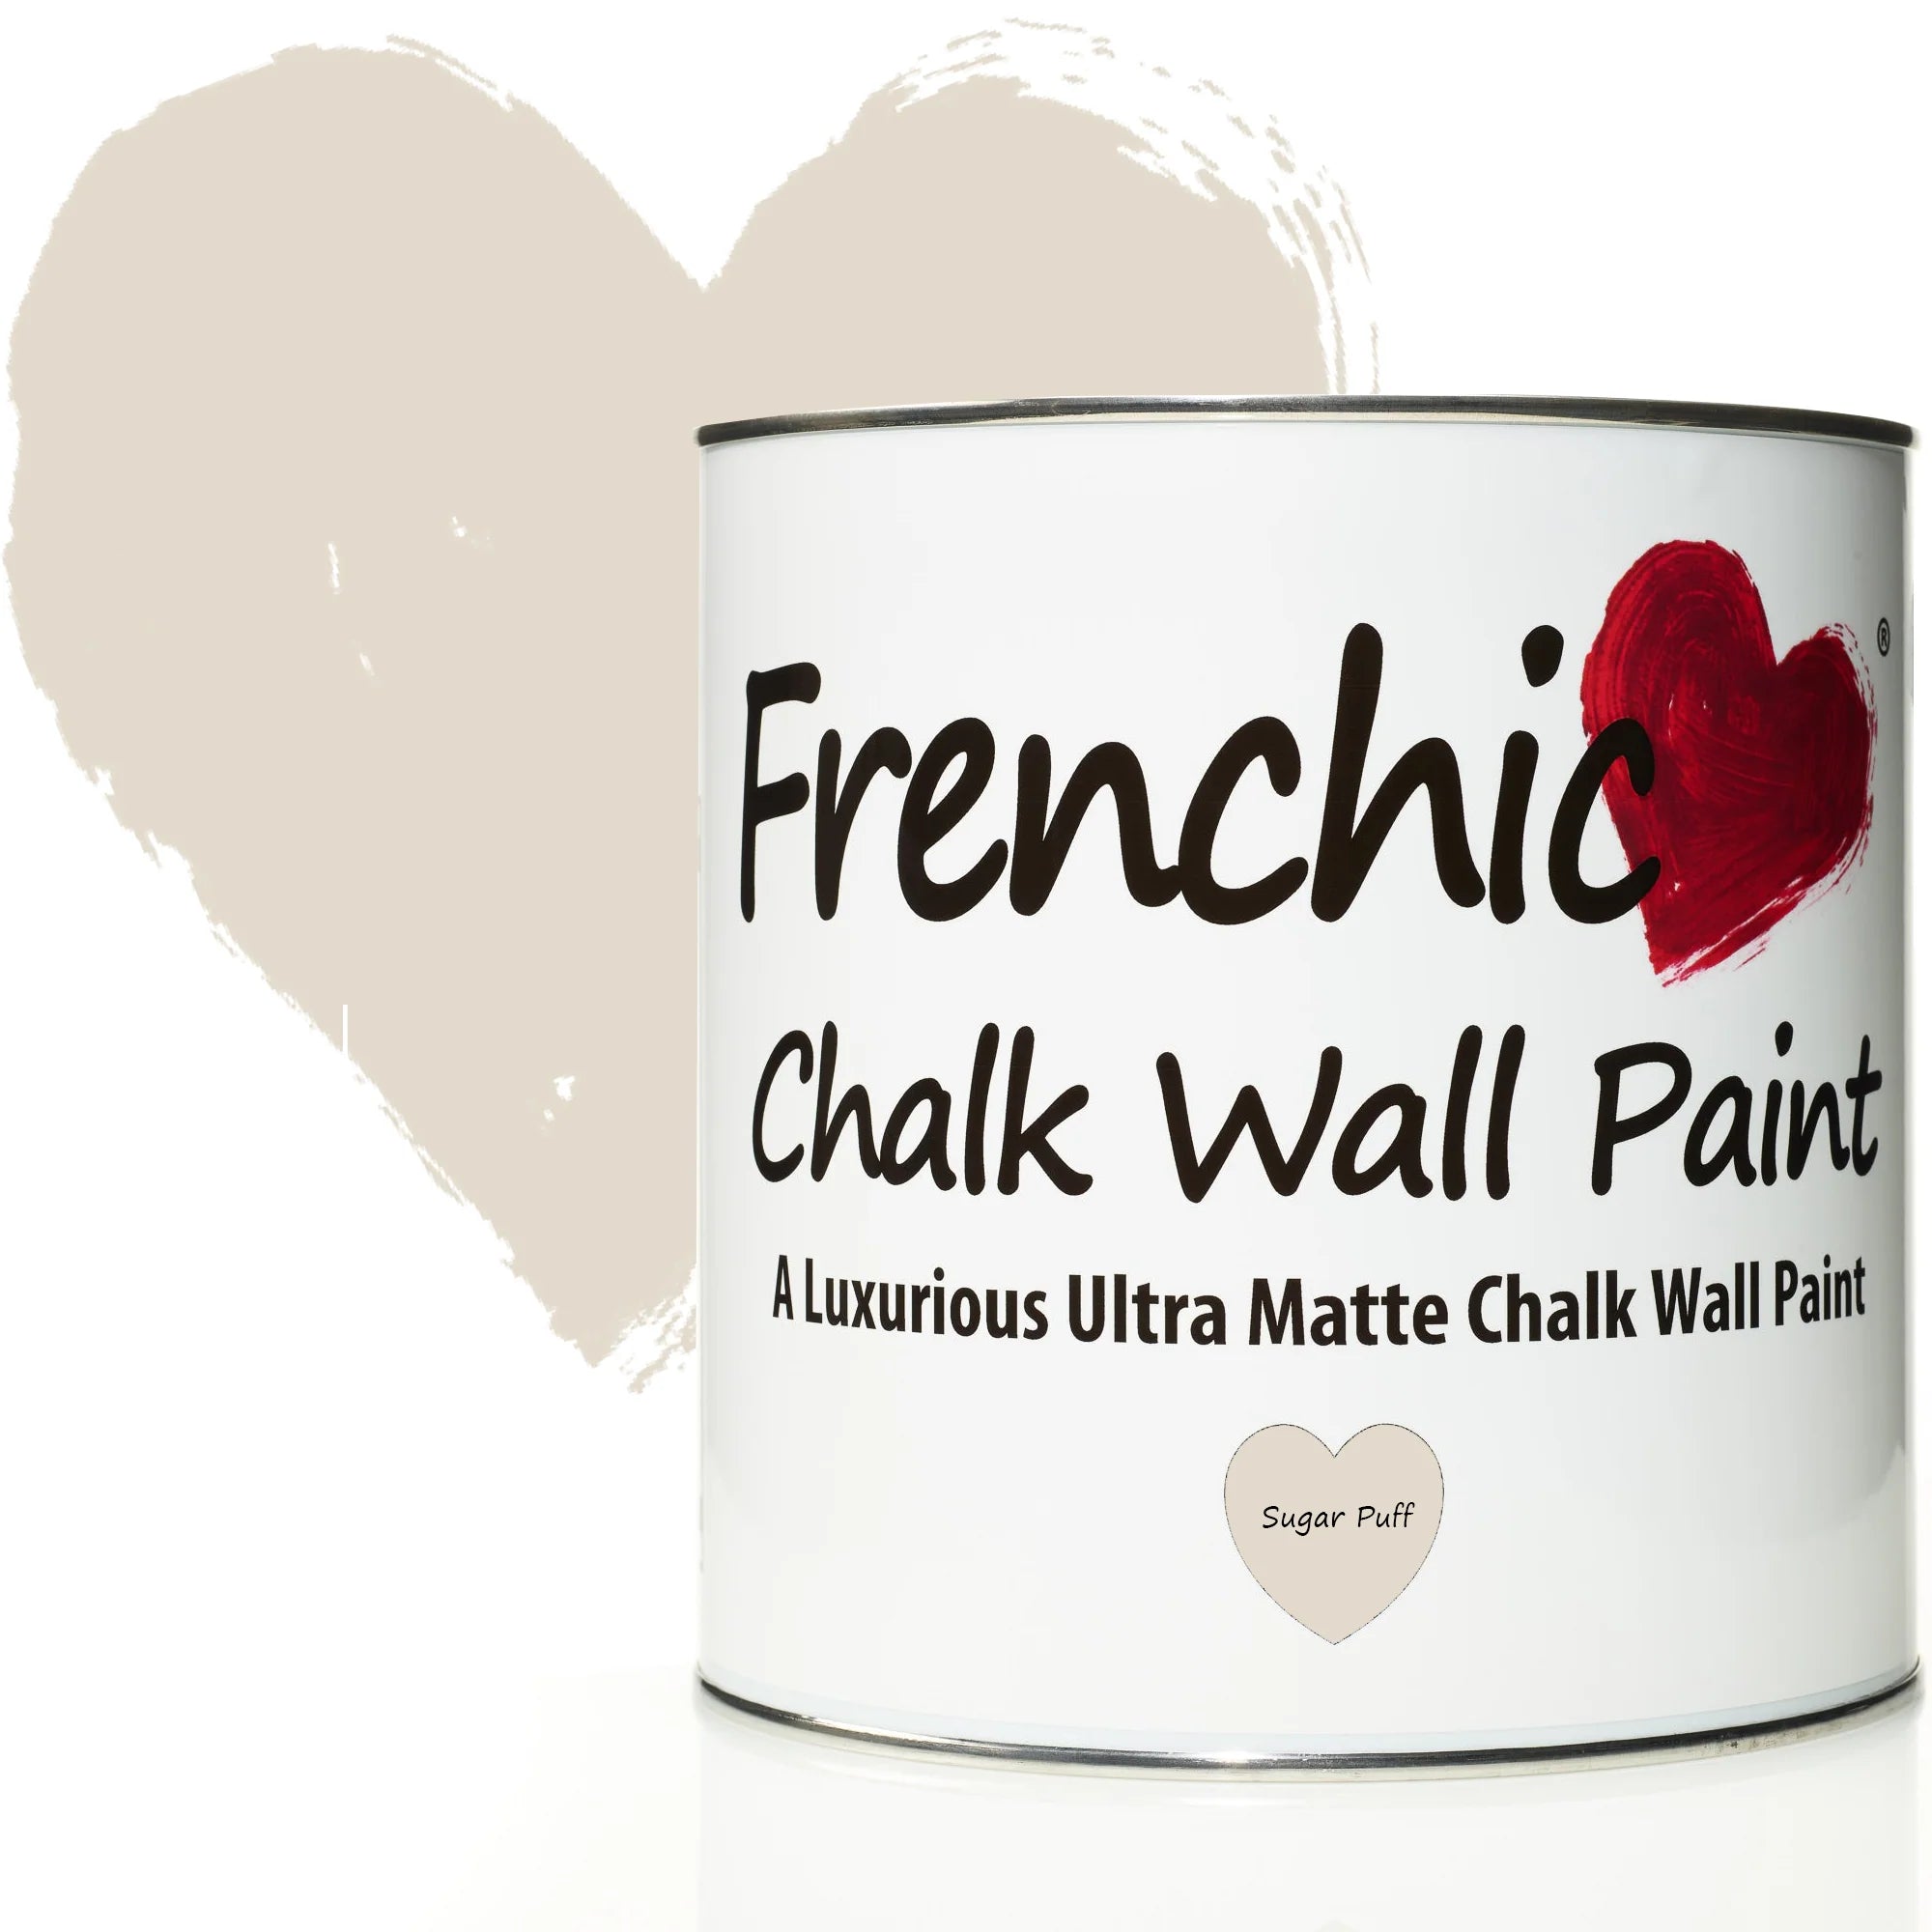 Frenchic Paint Sugar Puff Wall Paint 2.5L Frenchic Paint Chalk Wall Paint Range by Weirs of Baggot Street Irelands Largest and most Trusted Stockist of Frenchic Paint. Shop online for Nationwide and Same Day Dublin Delivery